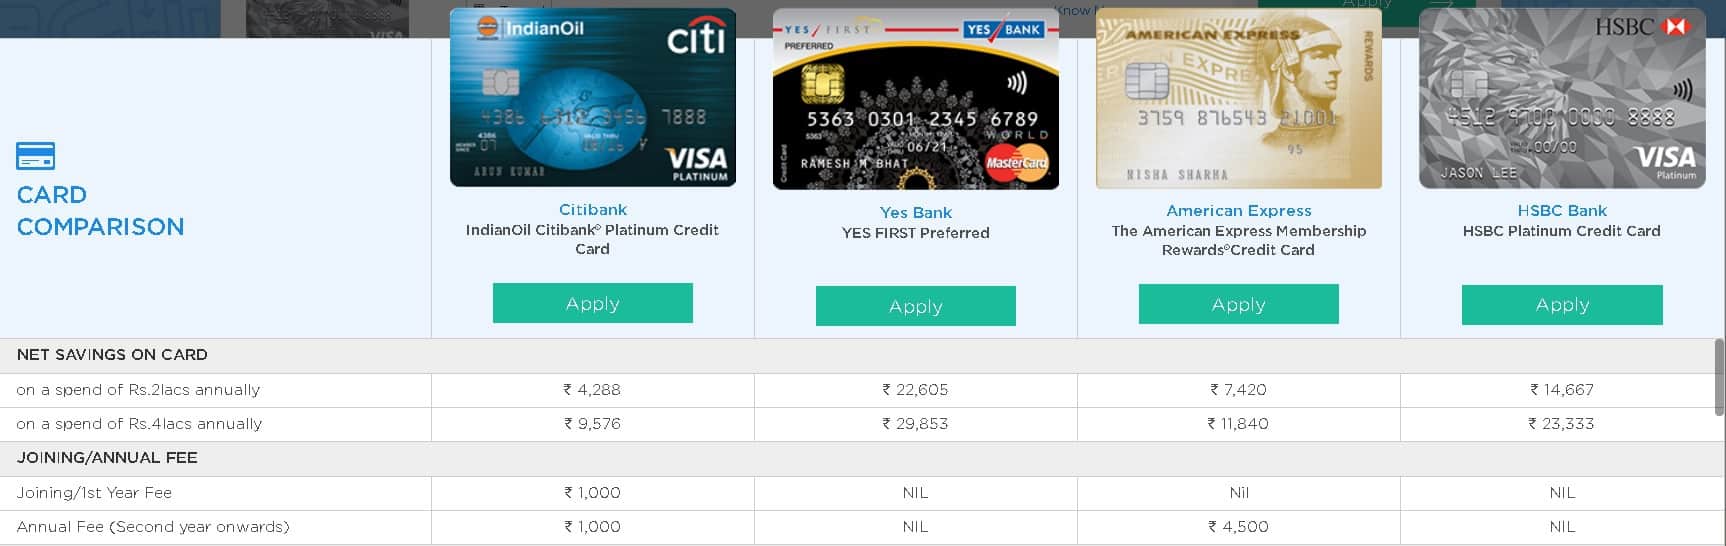 Credit Card Selection In India: card comparison chart part 1 showing fees